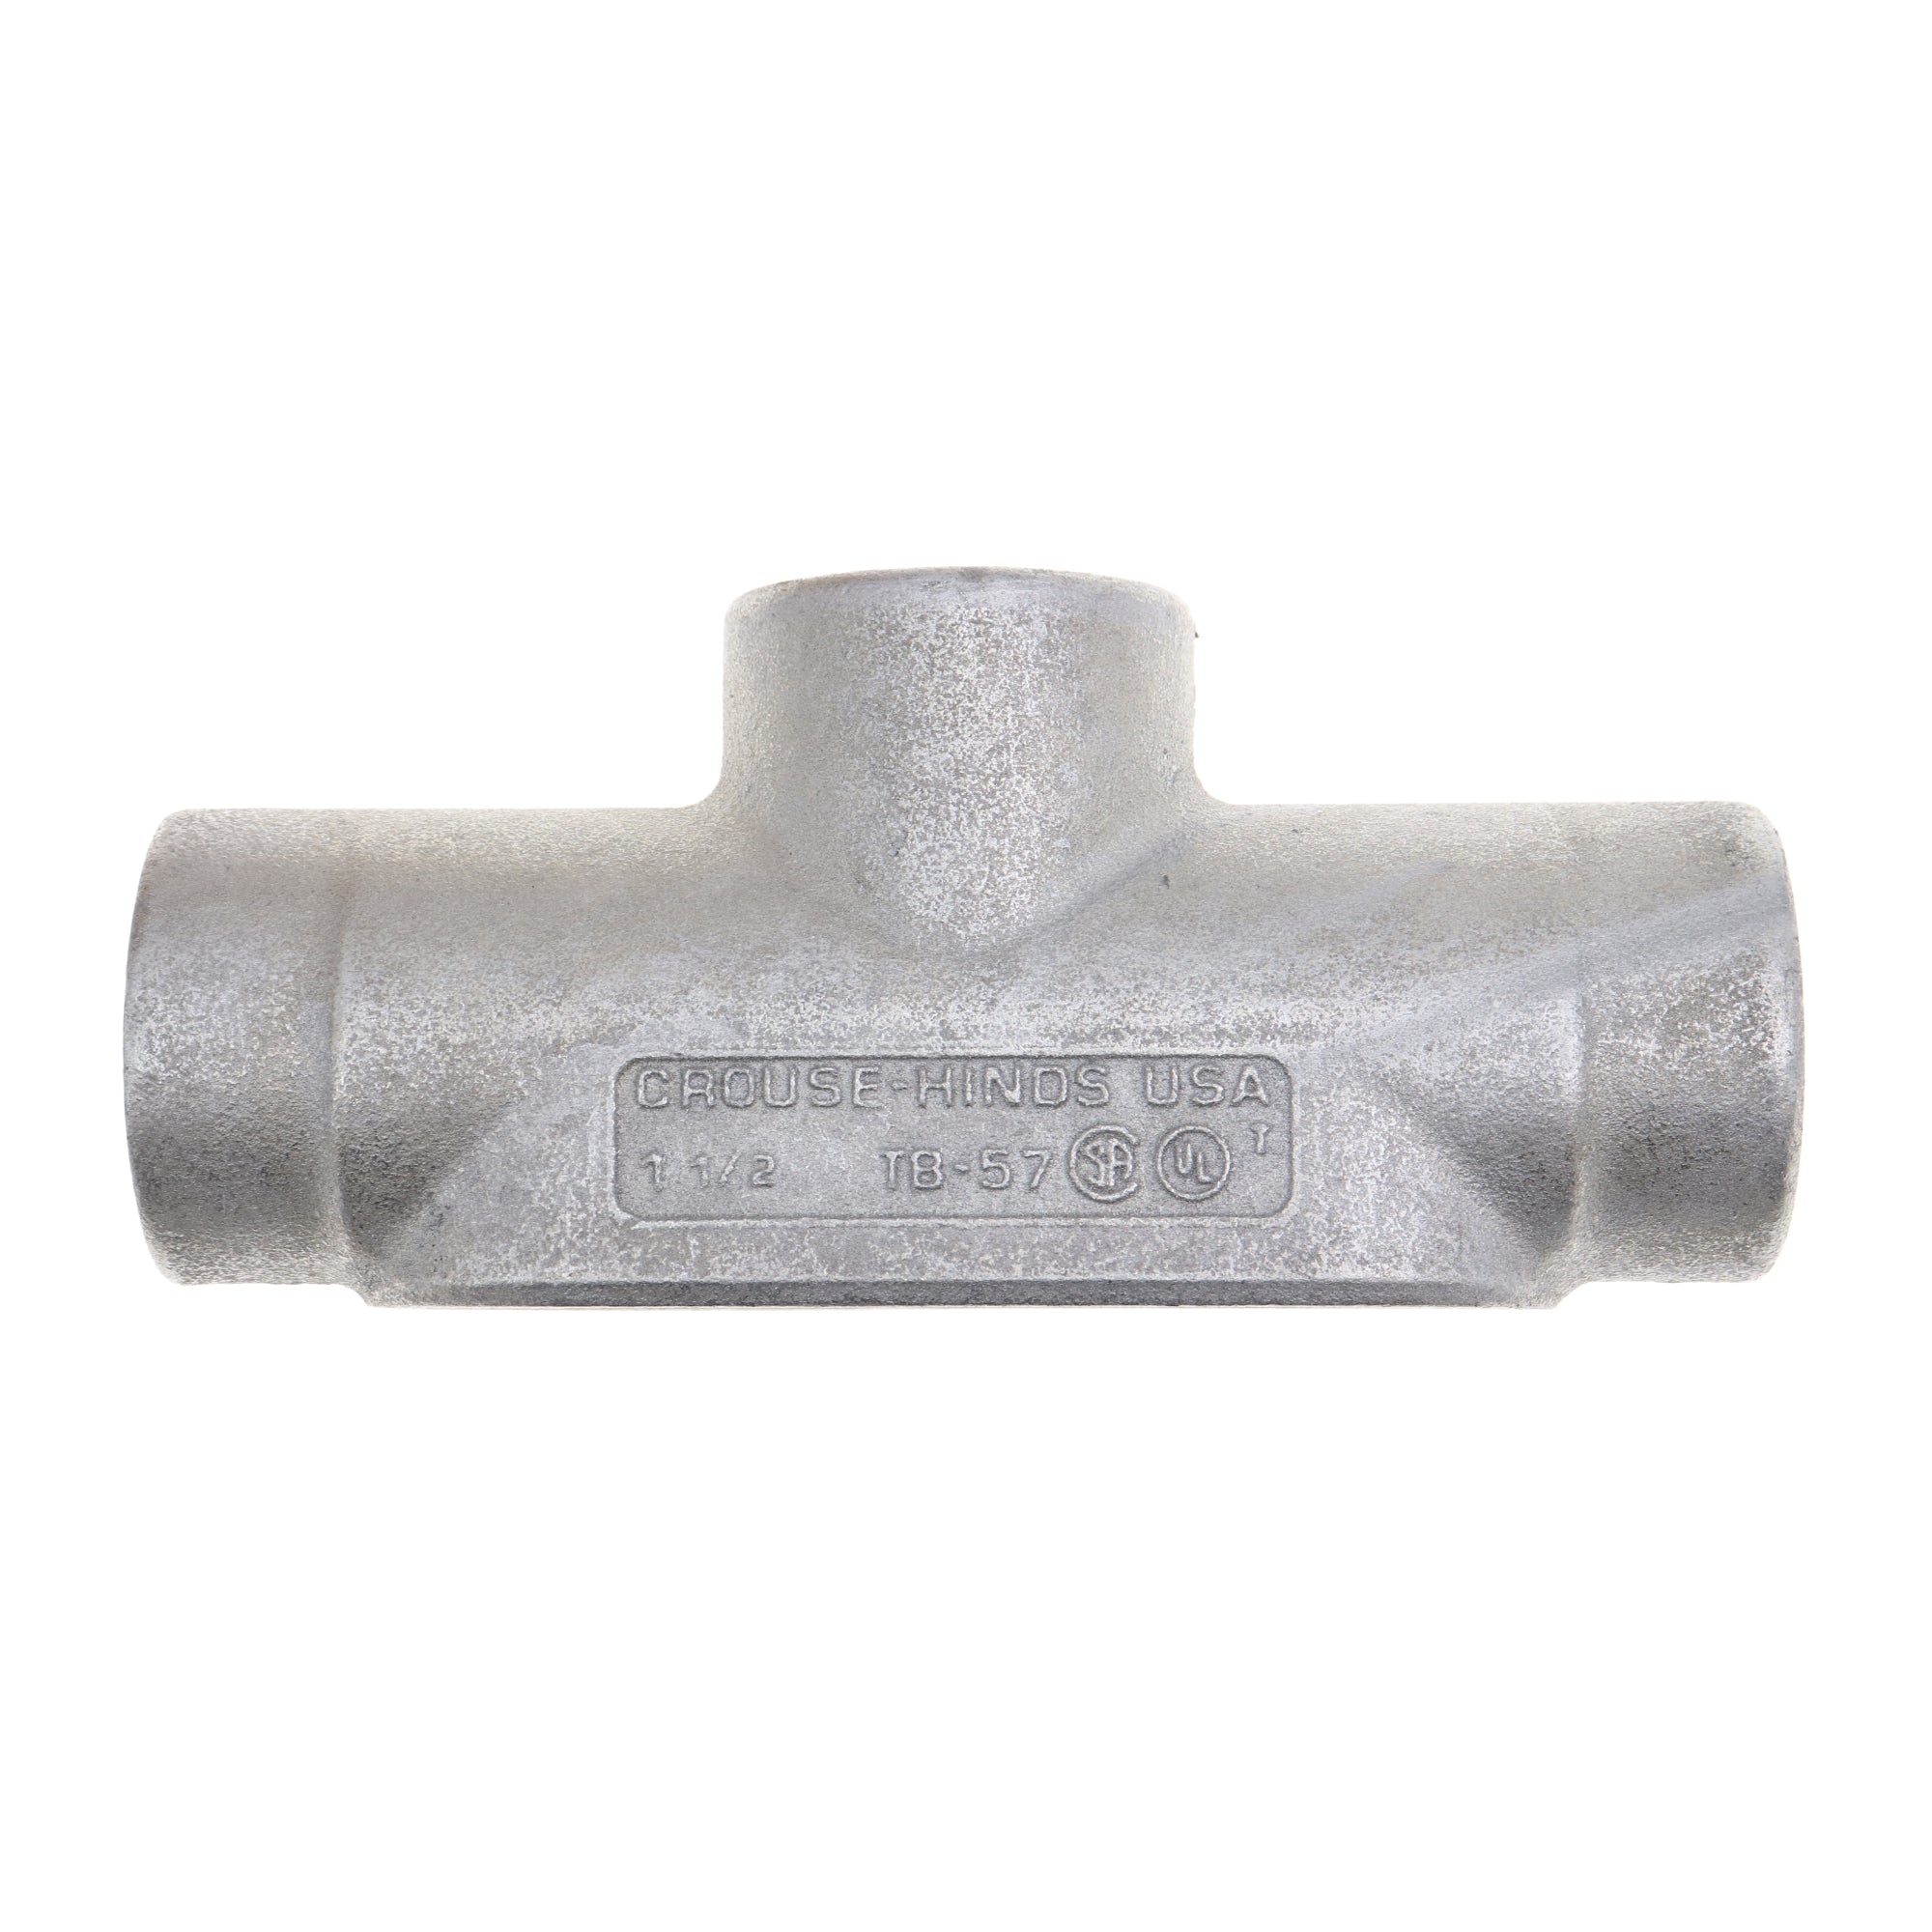 Crouse Hinds, CROUSE-HINDS TB57 CONDULET FORM-7 CONDUIT OUTLET BODY, TB-SHAPE, 1-1/2-INCH